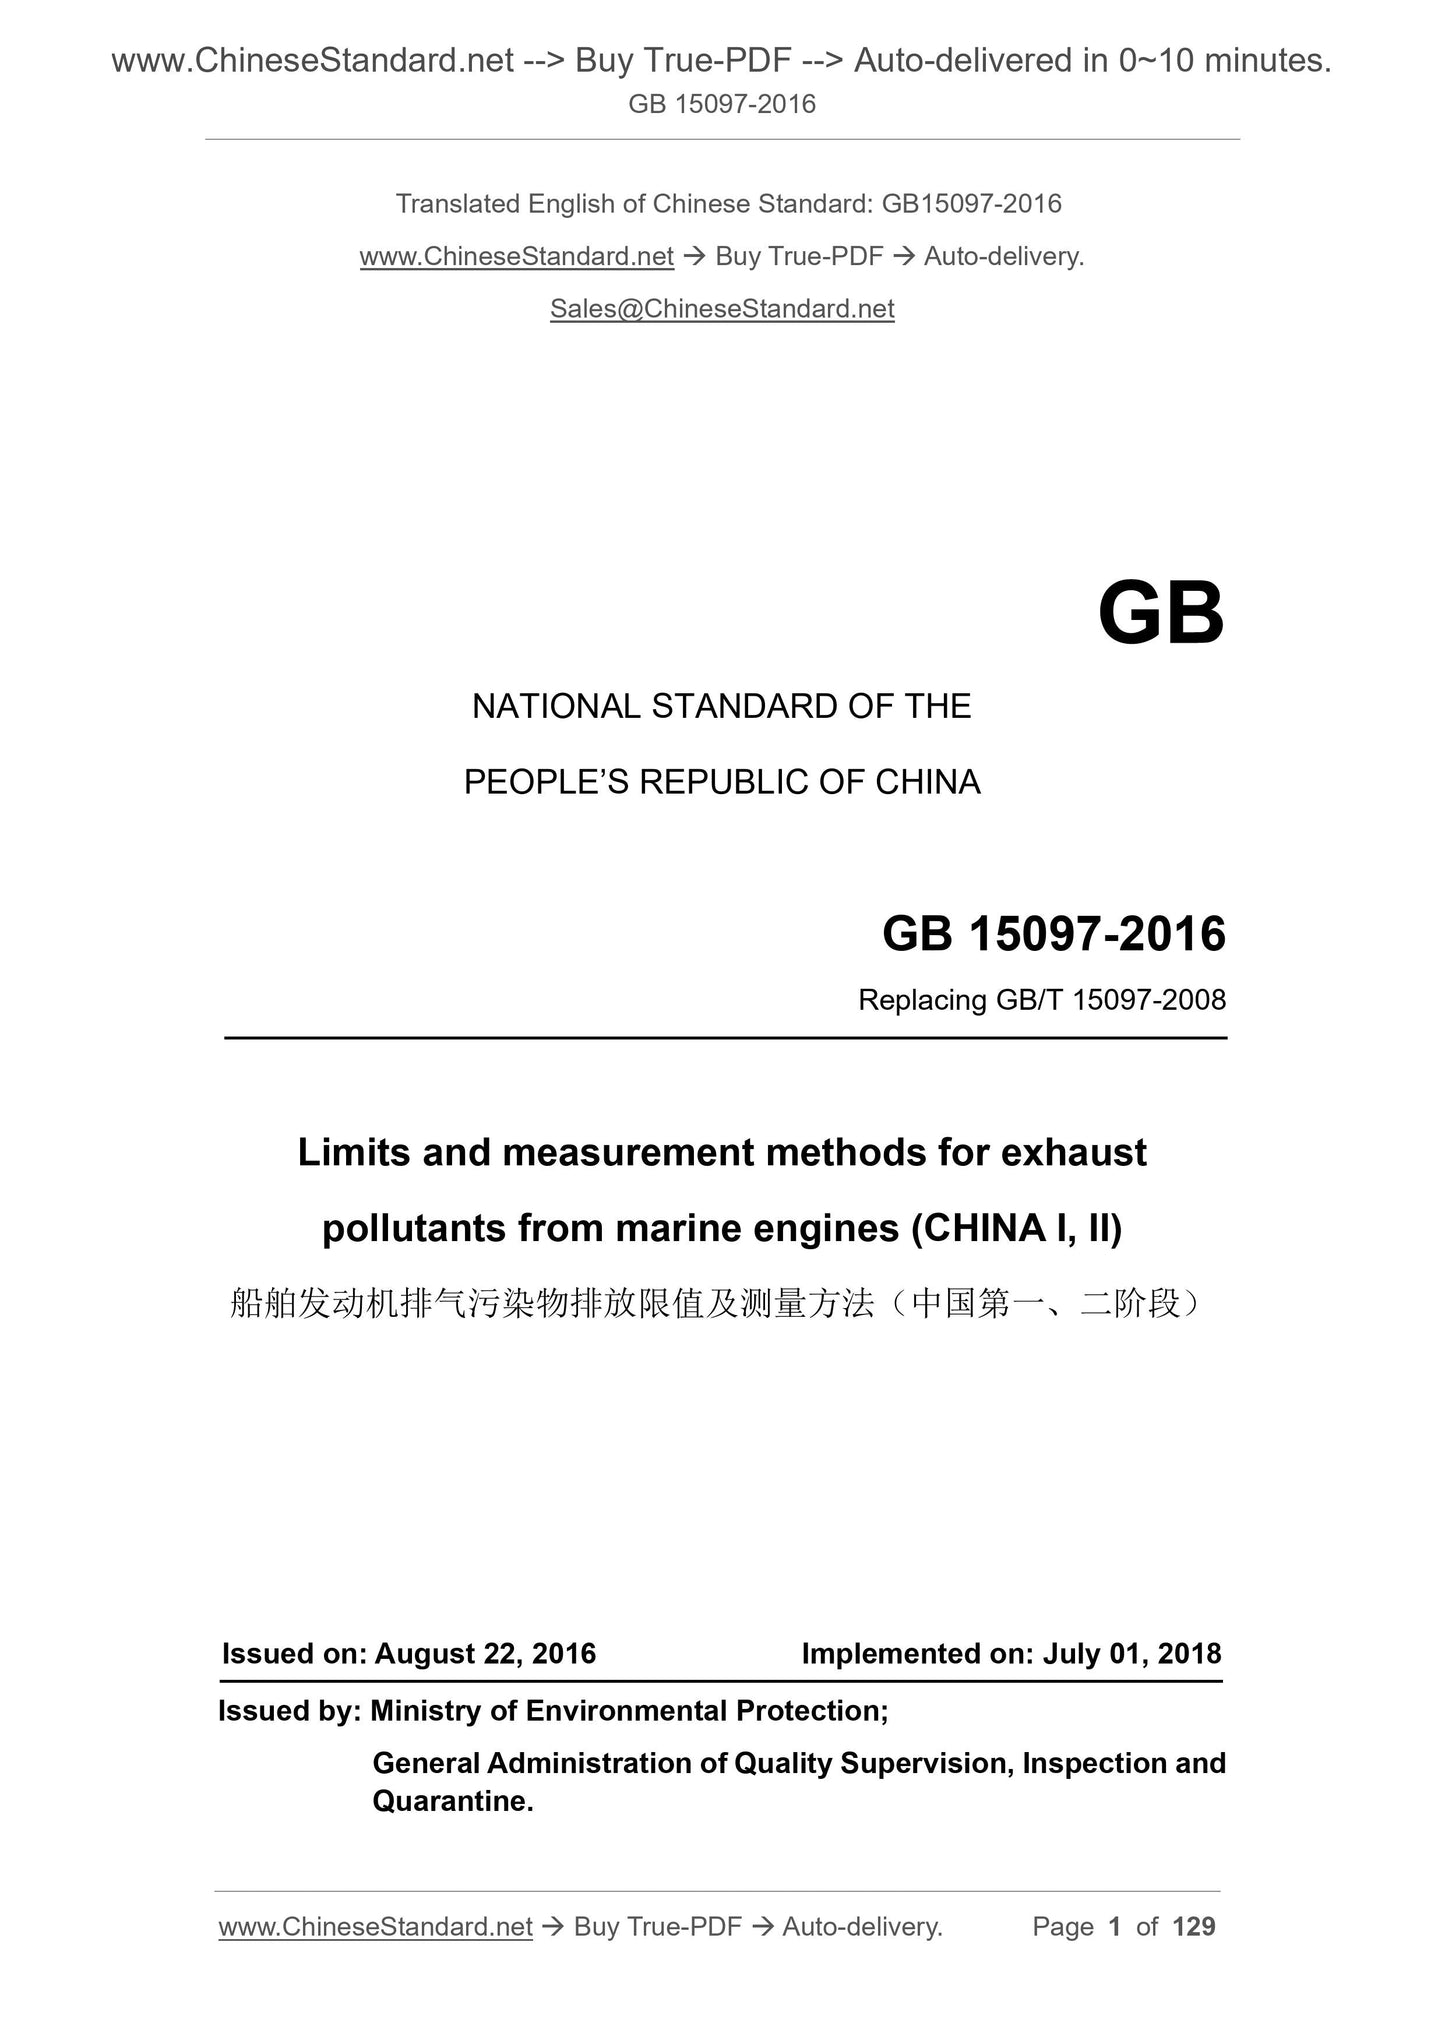 GB 15097-2016 Page 1